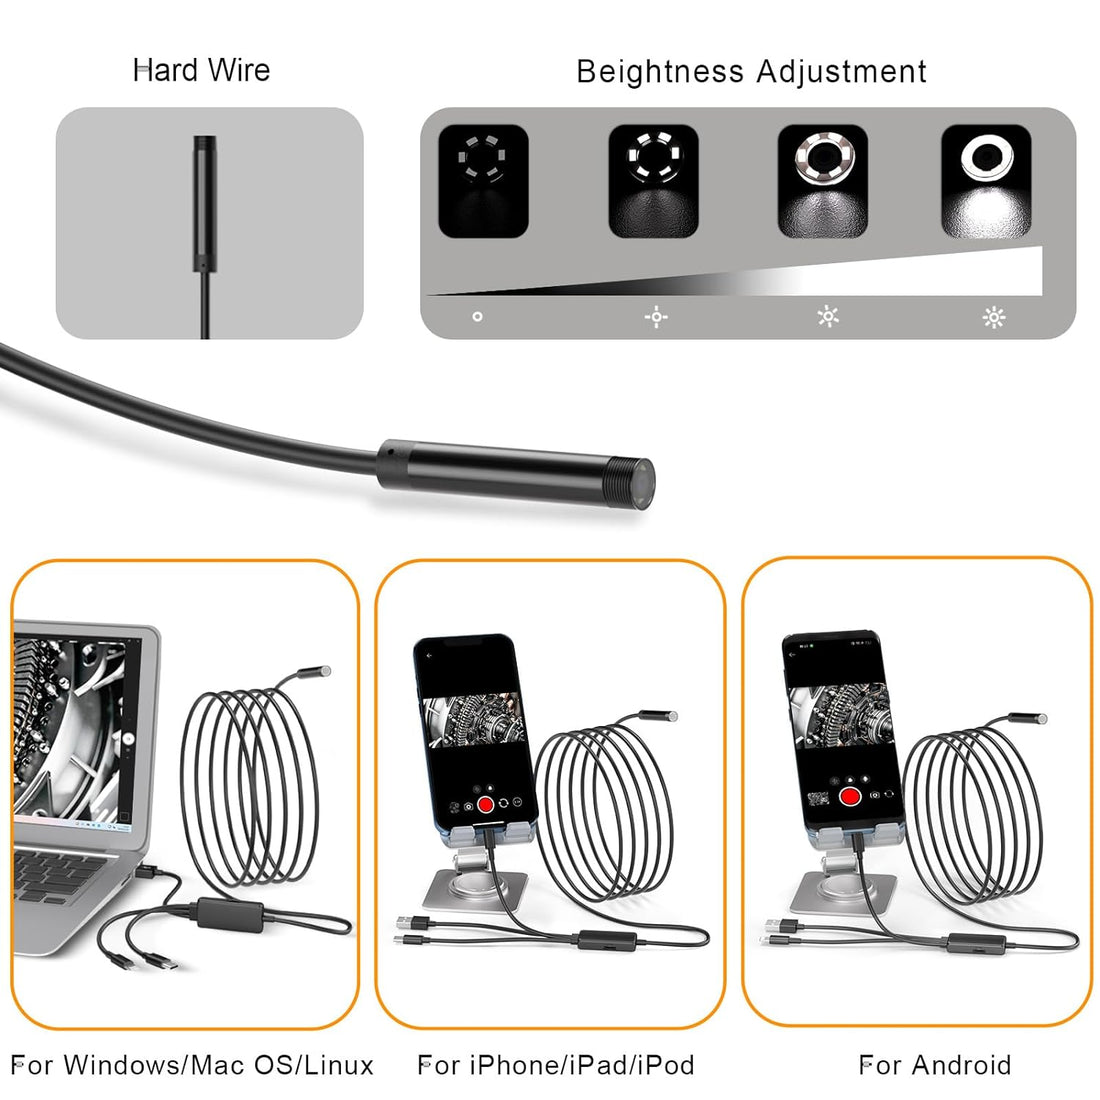 Endoscope Camera with Light, 1920P HD Borescopes with 6 Adjustable LEDs, 16.4FT IP67 Waterproof Inspection Camera 5.5mm semi-Rigid Snake Cable, 3 in 1 Endoscope Camera